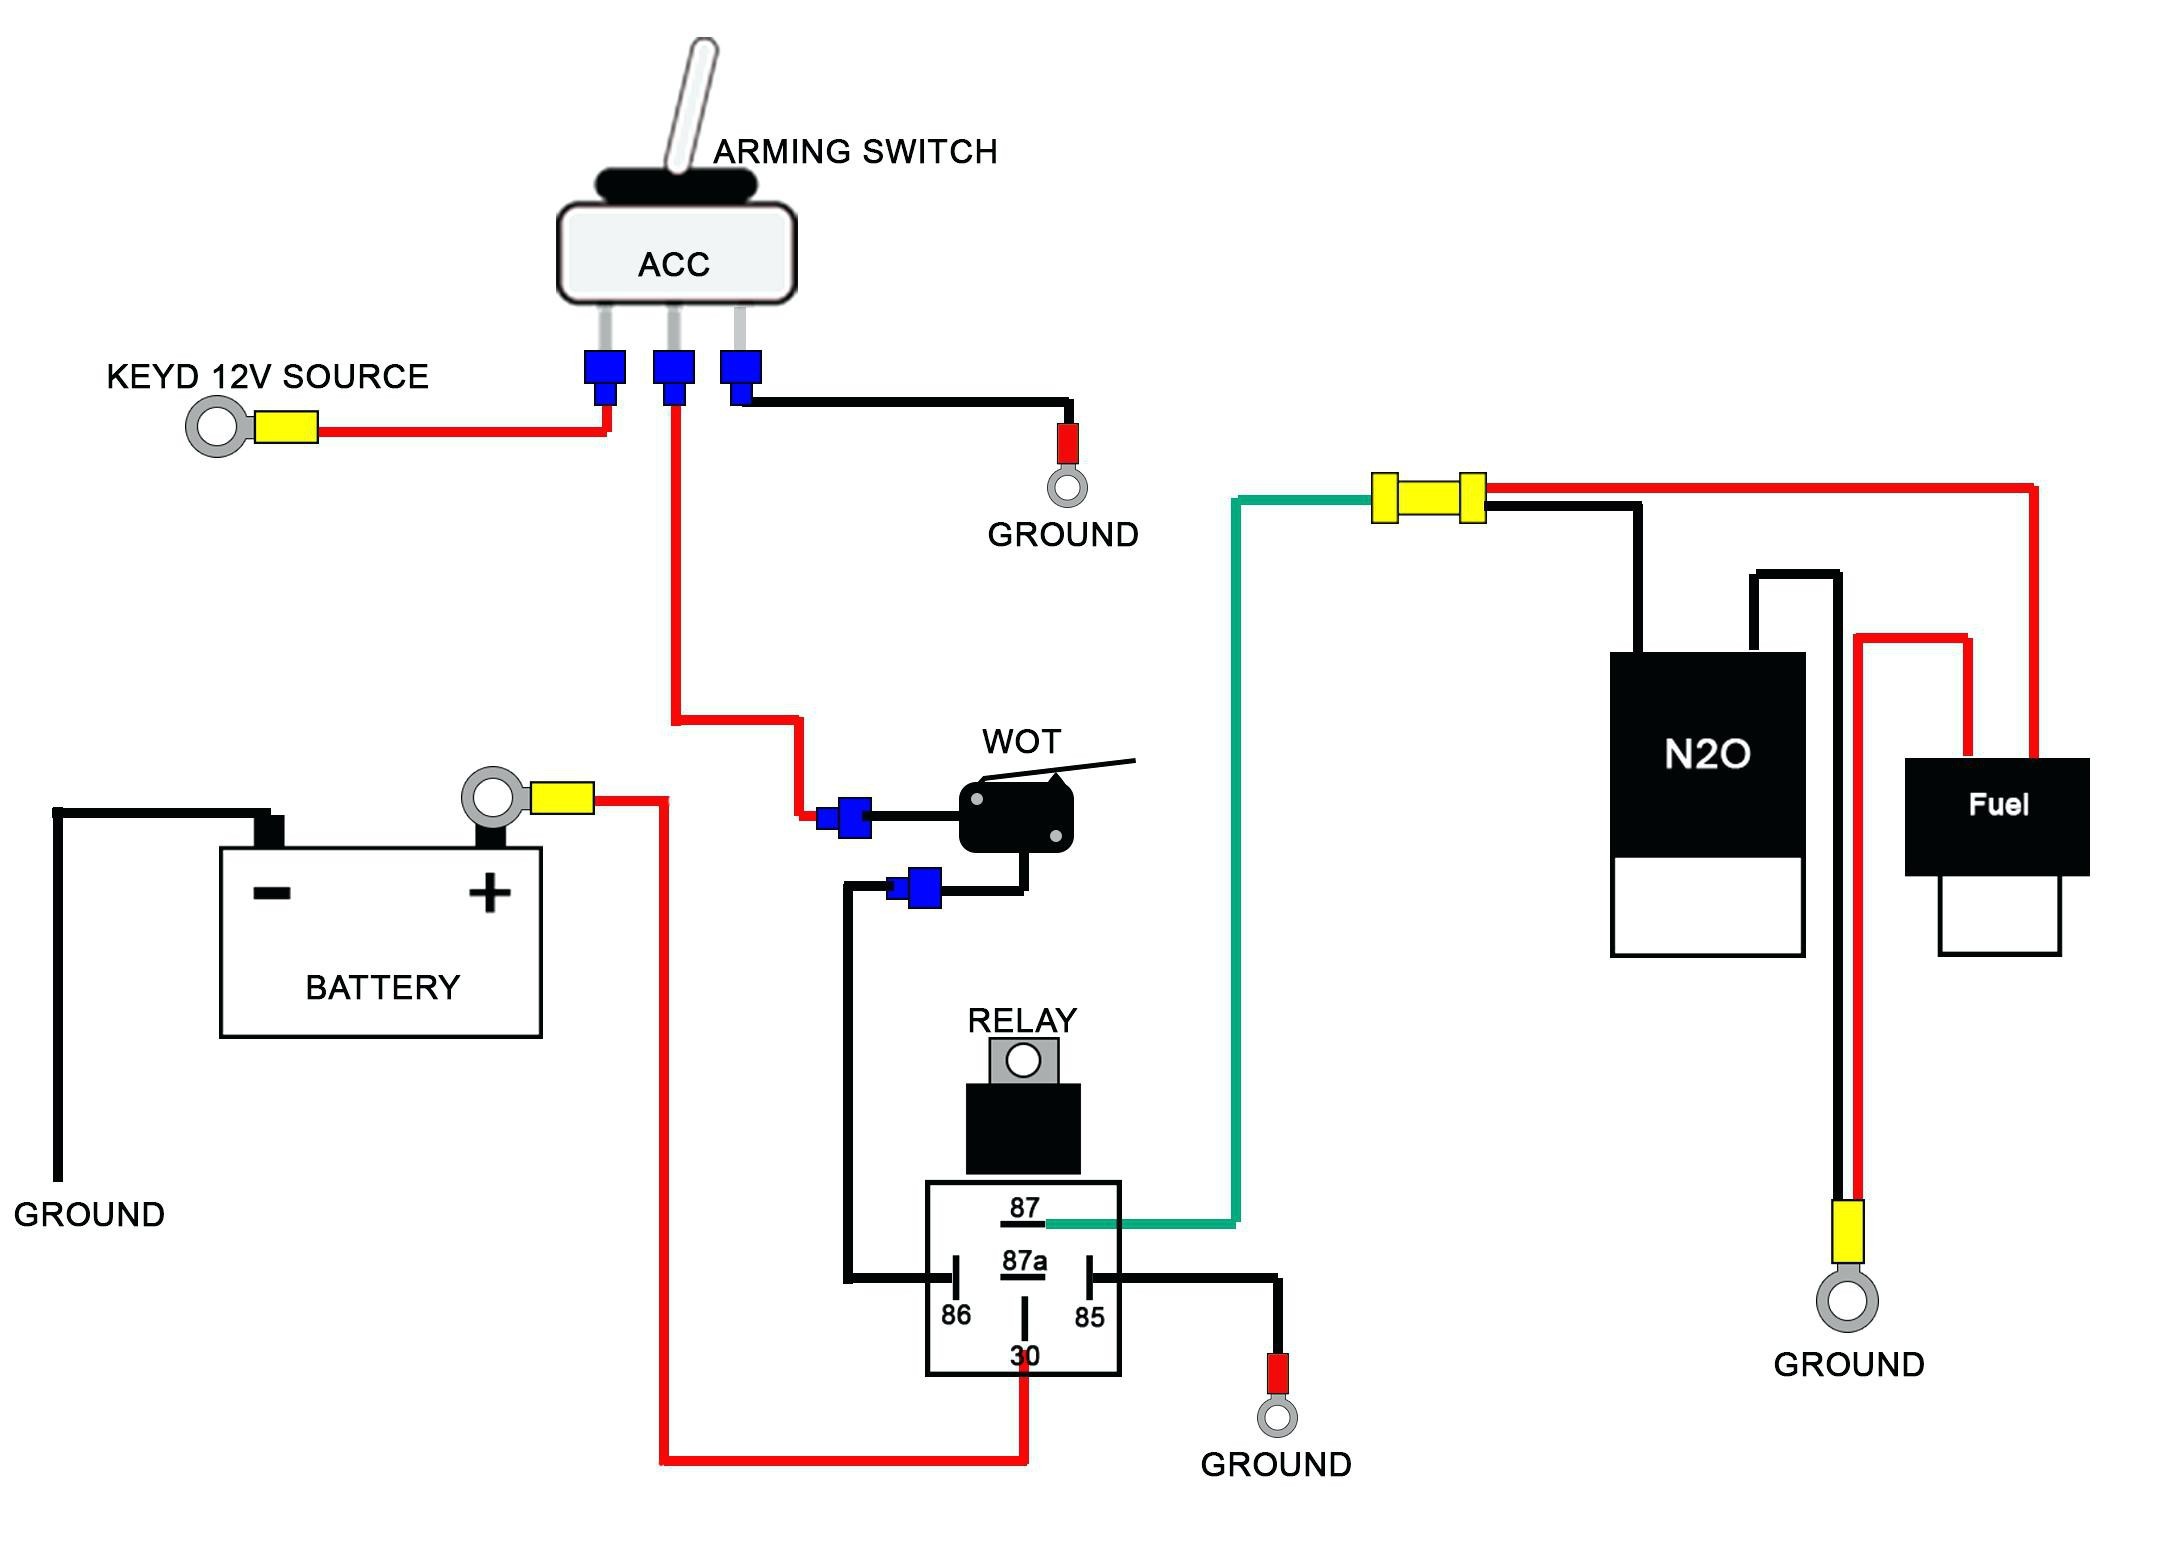 Horn Wiring Diagram with Relay Luxury Automotive Relay Wiring Diagram 12v astonishing for A 4 Pin